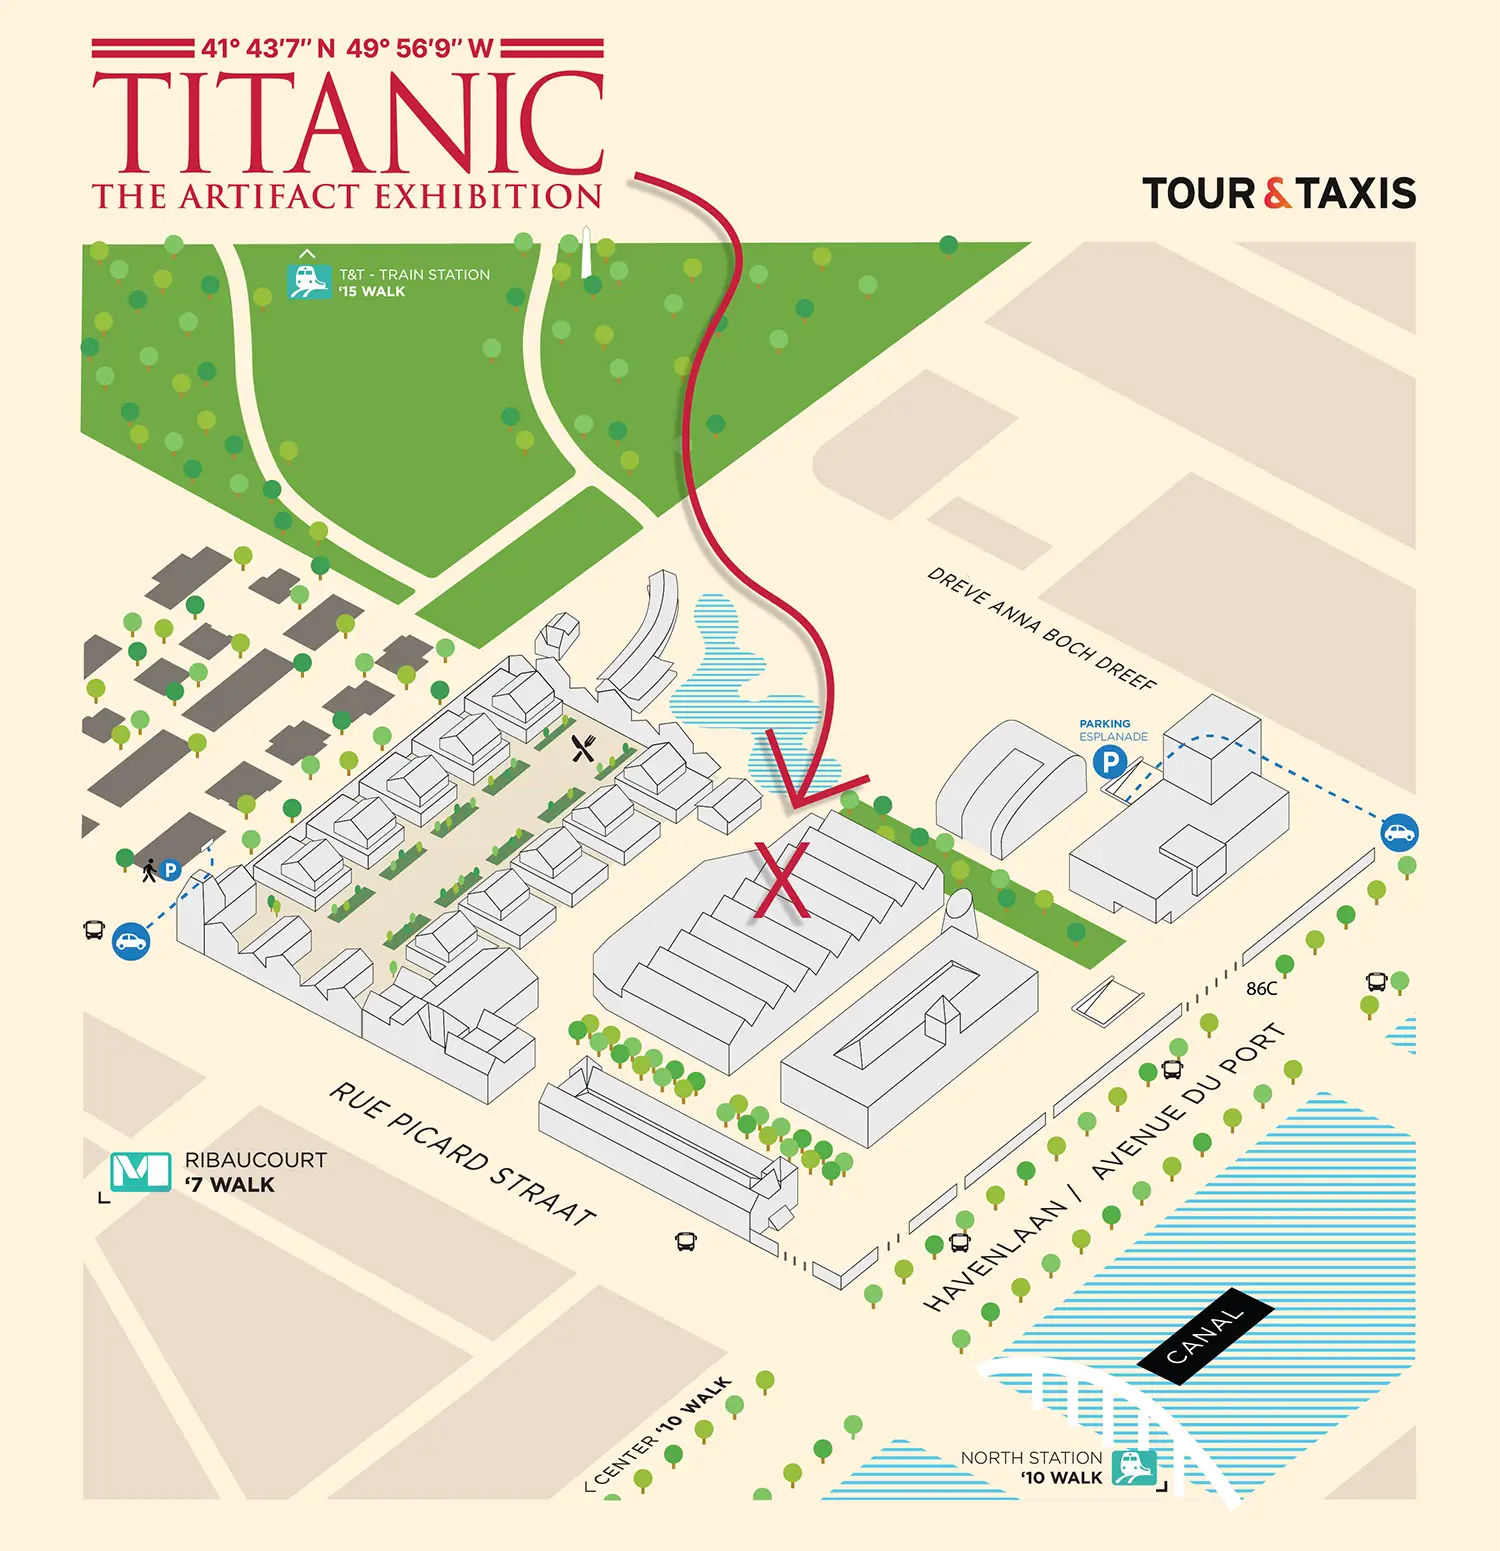 Tour & Taxis map